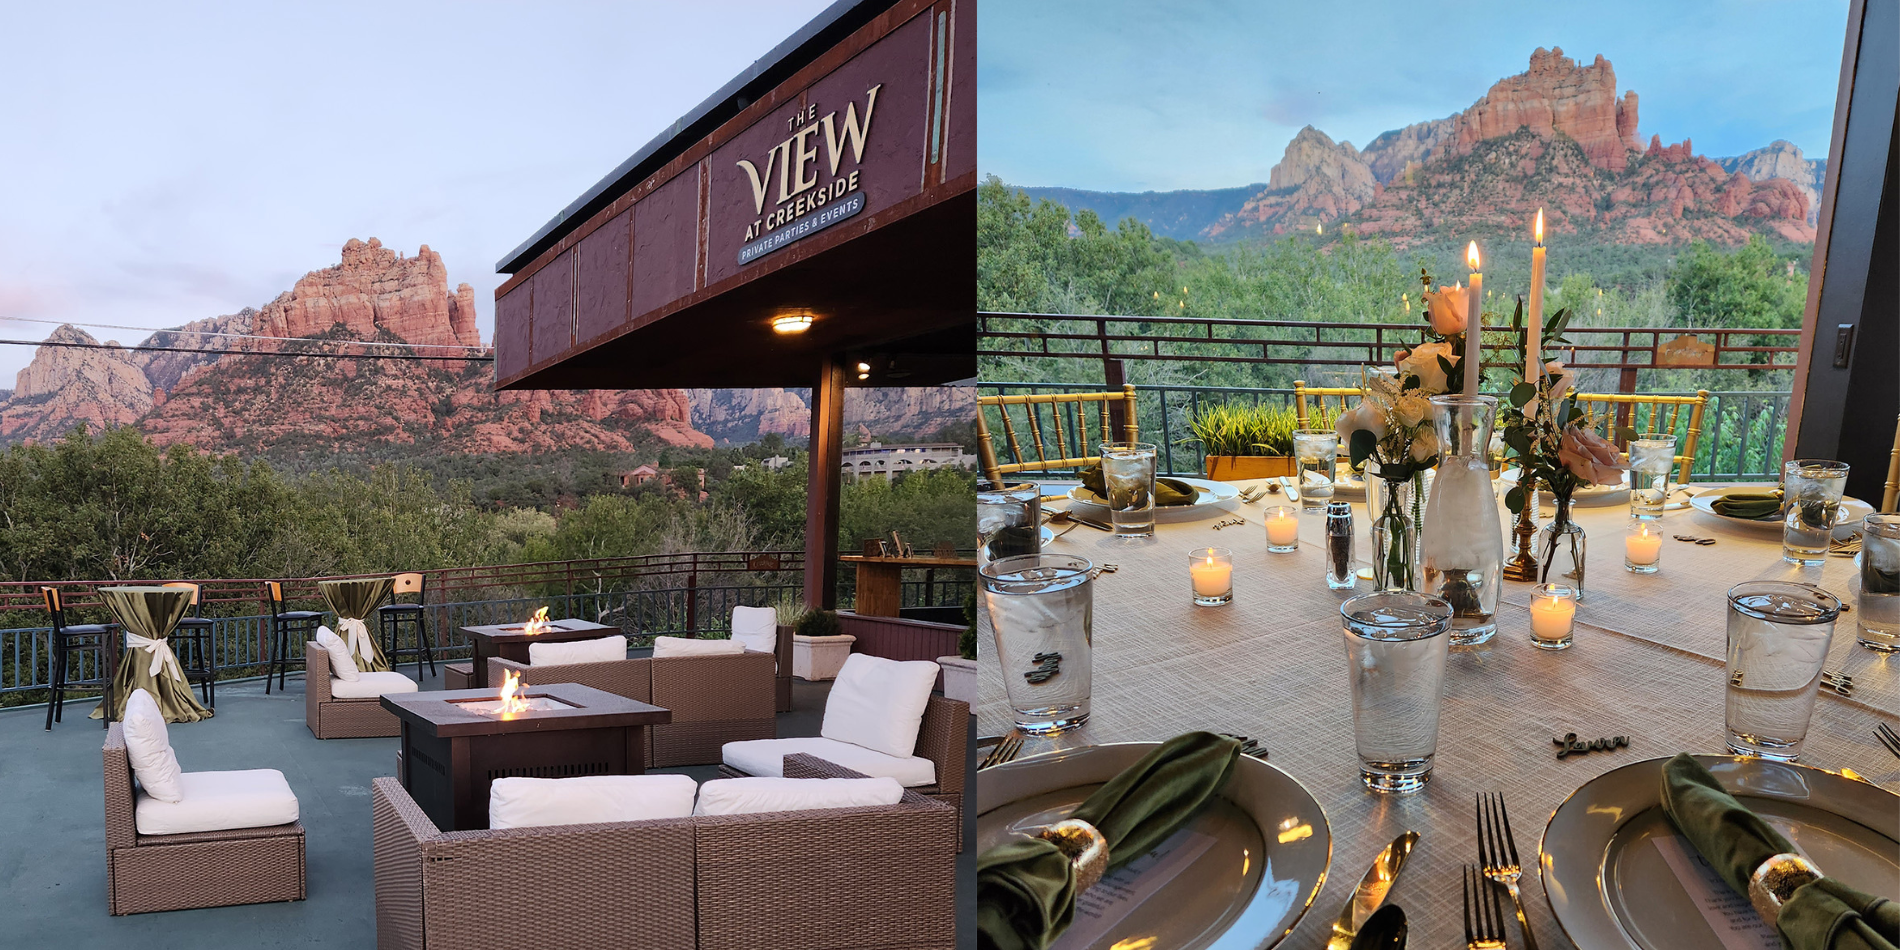 This image is a split-view of two outdoor settings at The View at Creekside. On the left, an inviting outdoor lounge area features comfortable wicker seating with white cushions, arranged around modern fire pits, all set against a backdrop of stunning red rock formations under a clear sky. To the right, an elegantly set dining table with golden cutlery, glassware, and a centerpiece composed of candles and fresh flowers awaits guests, offering a view of lush greenery and red rocks through a protective railing, suggesting an exclusive dining experience in a natural setting.